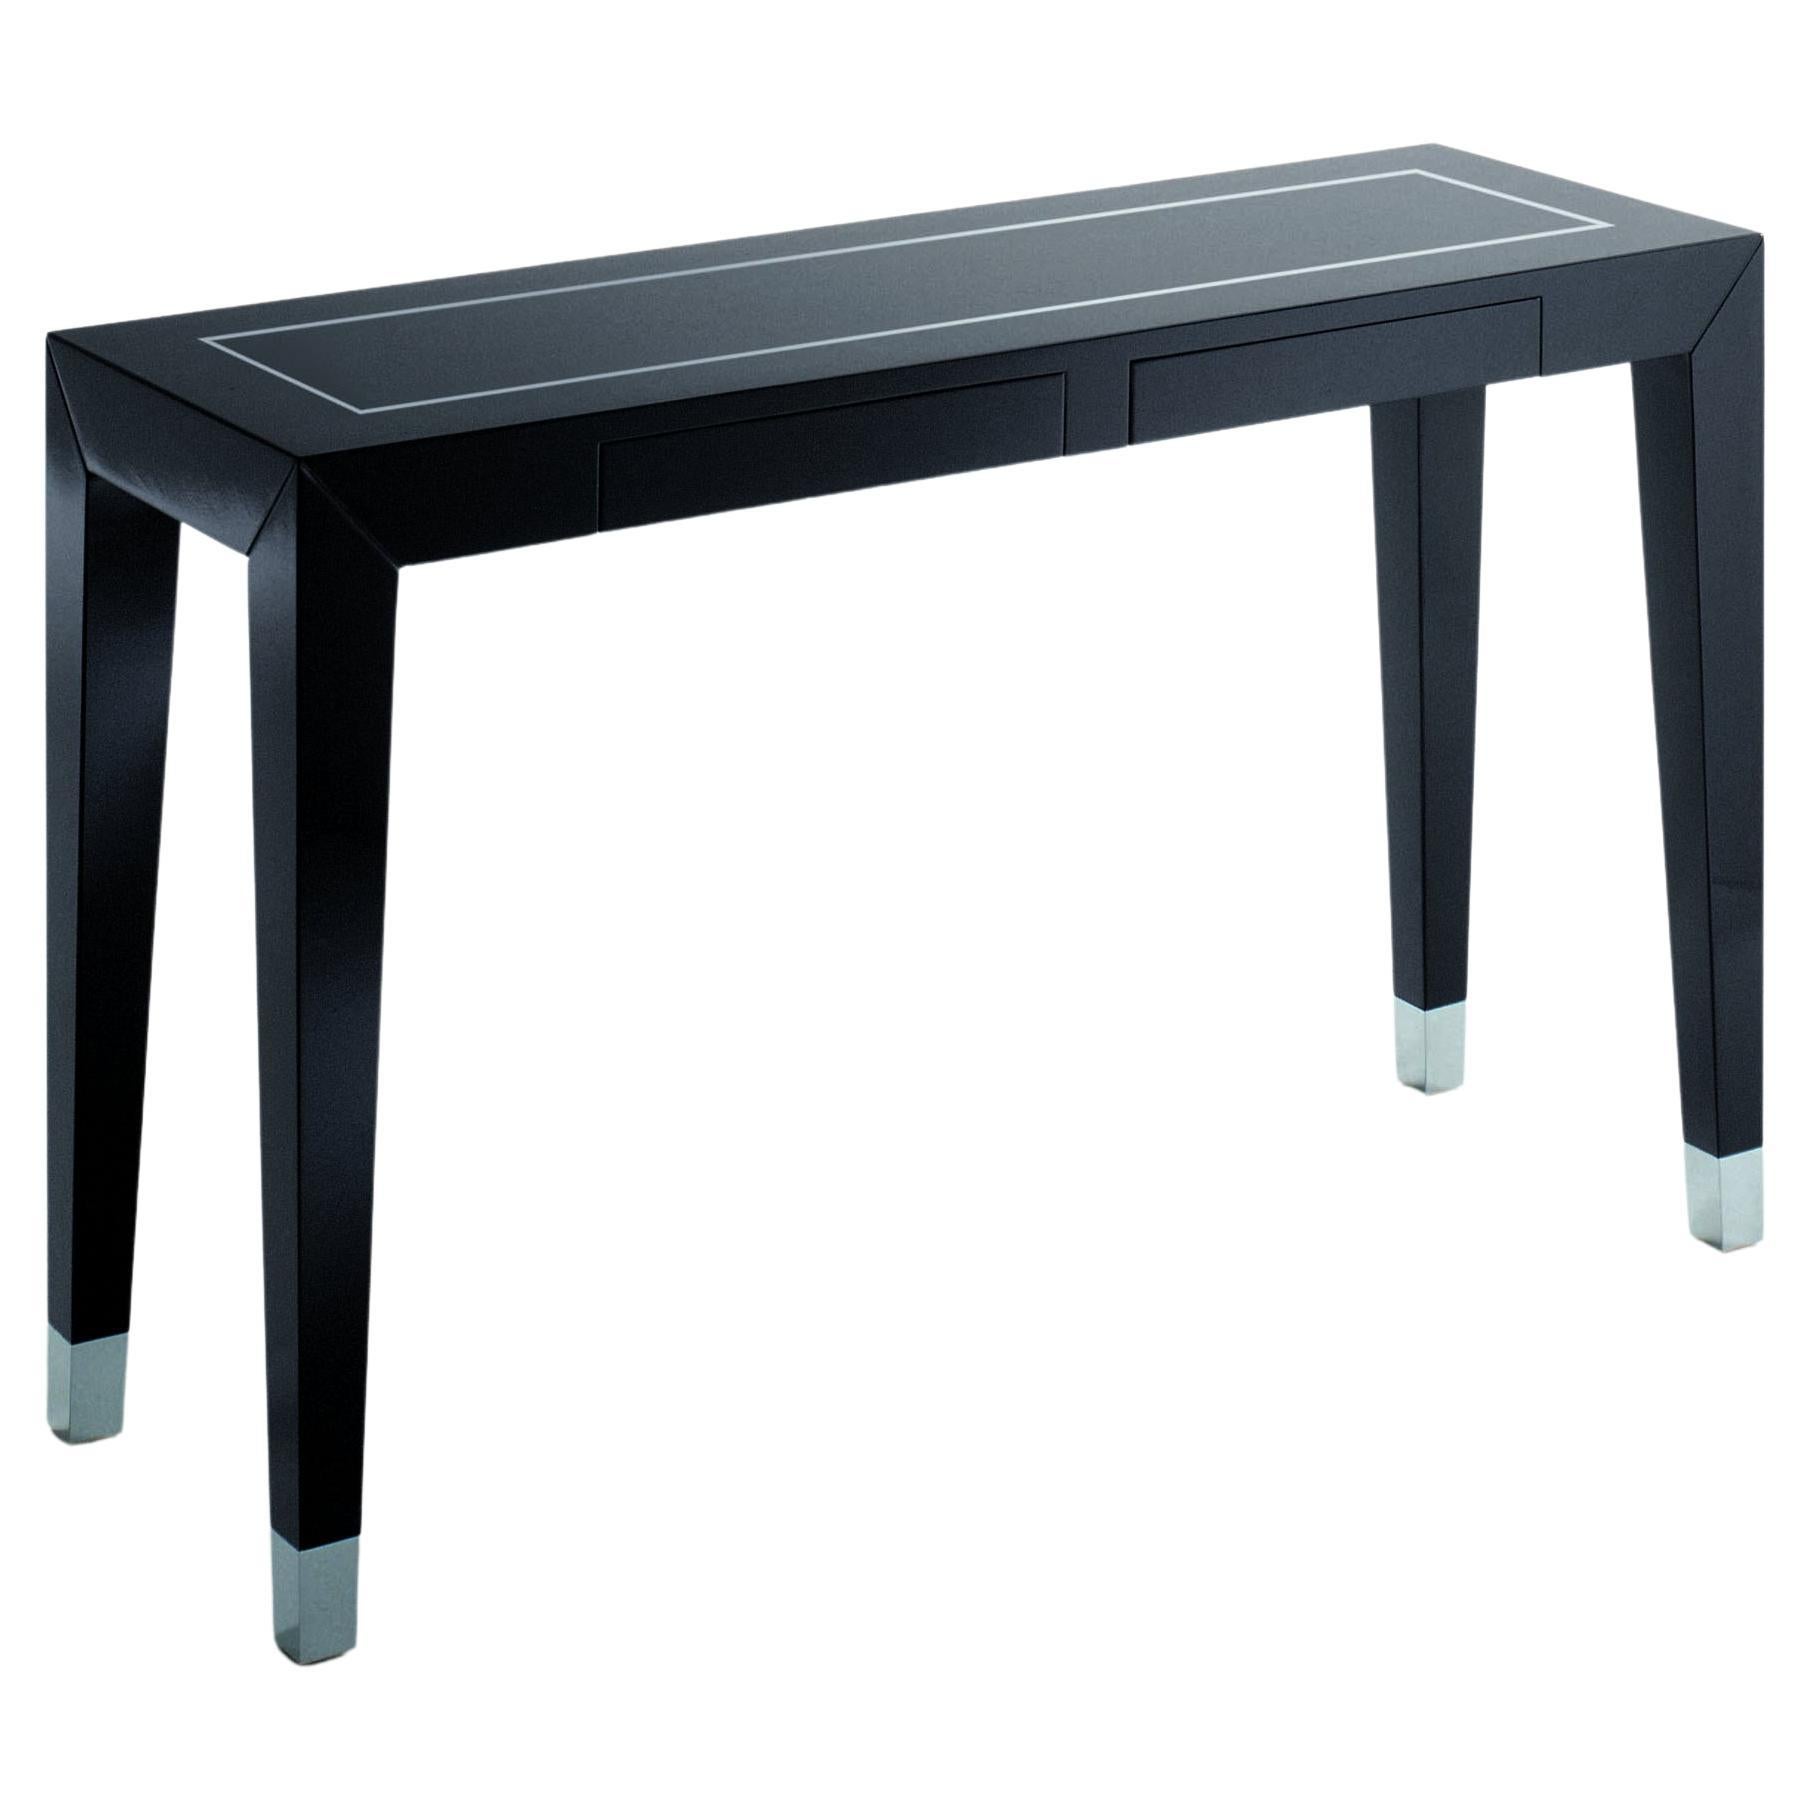 Limited, Orsi, Orson Console, High Gloss Lacquered Black Finish